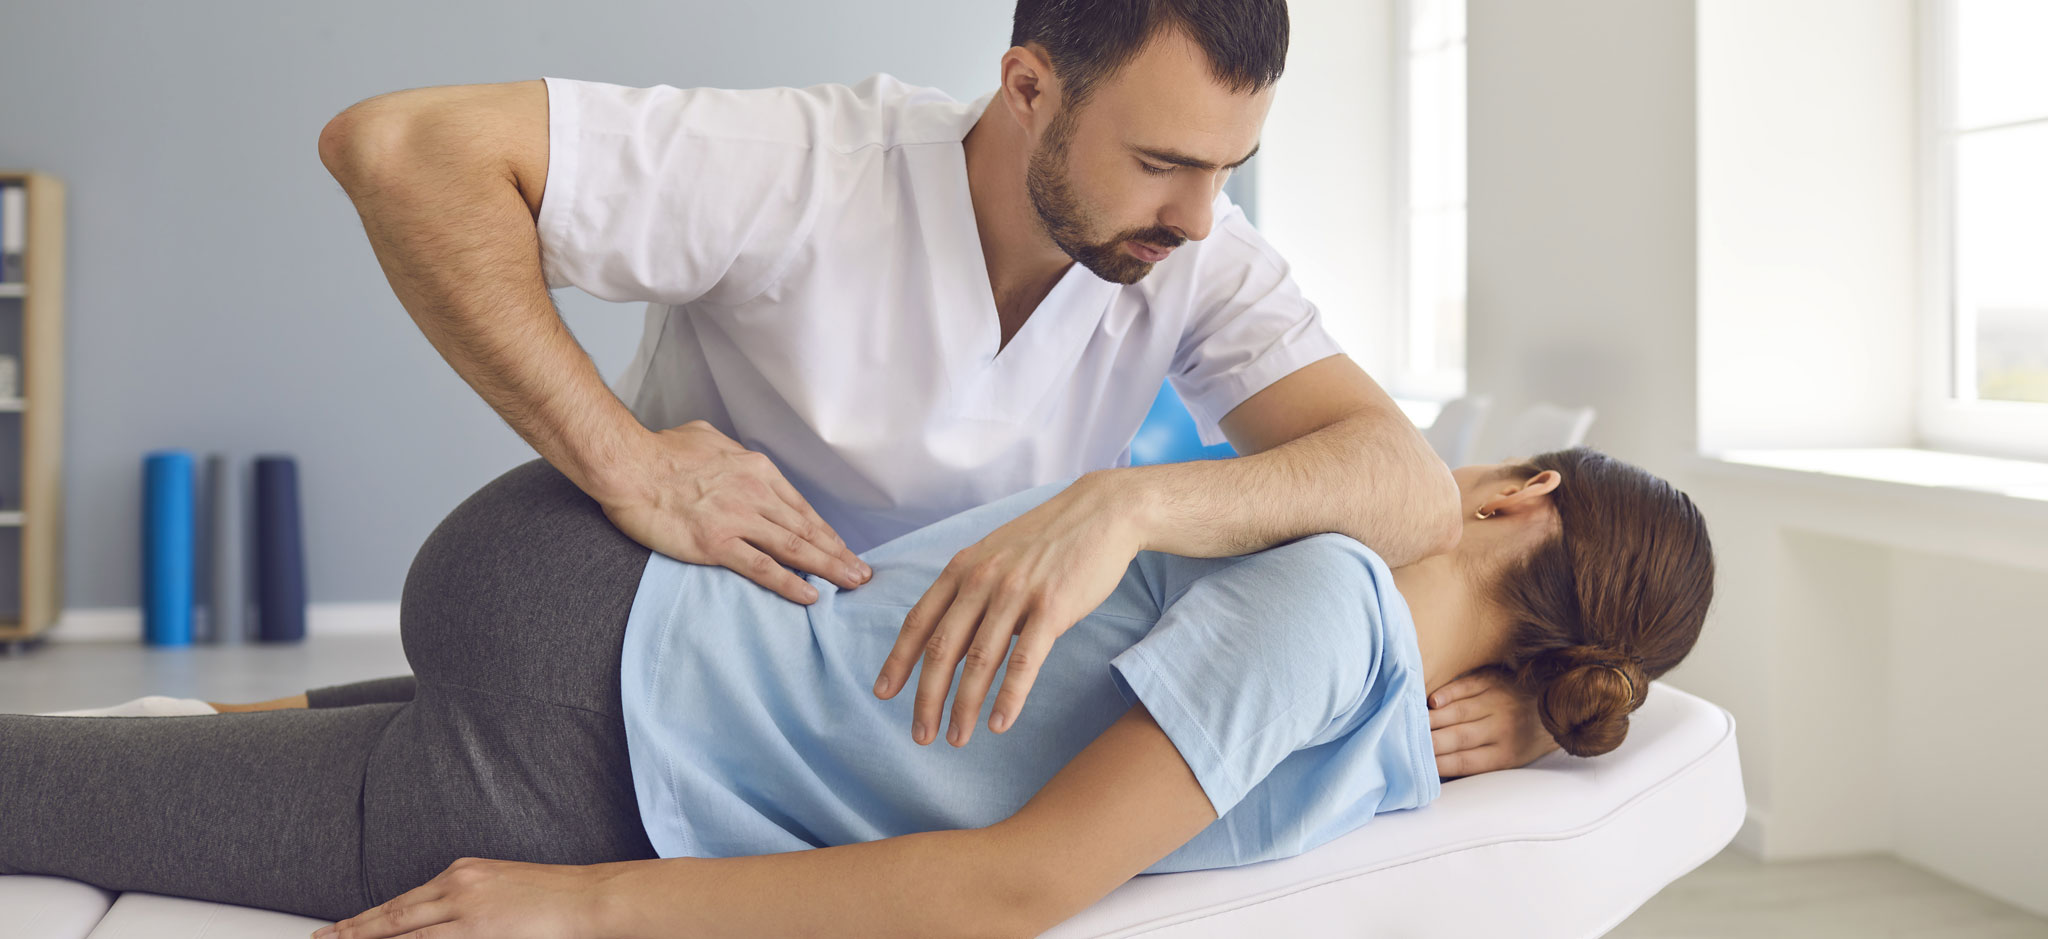 Chiropractor works on a woman's back